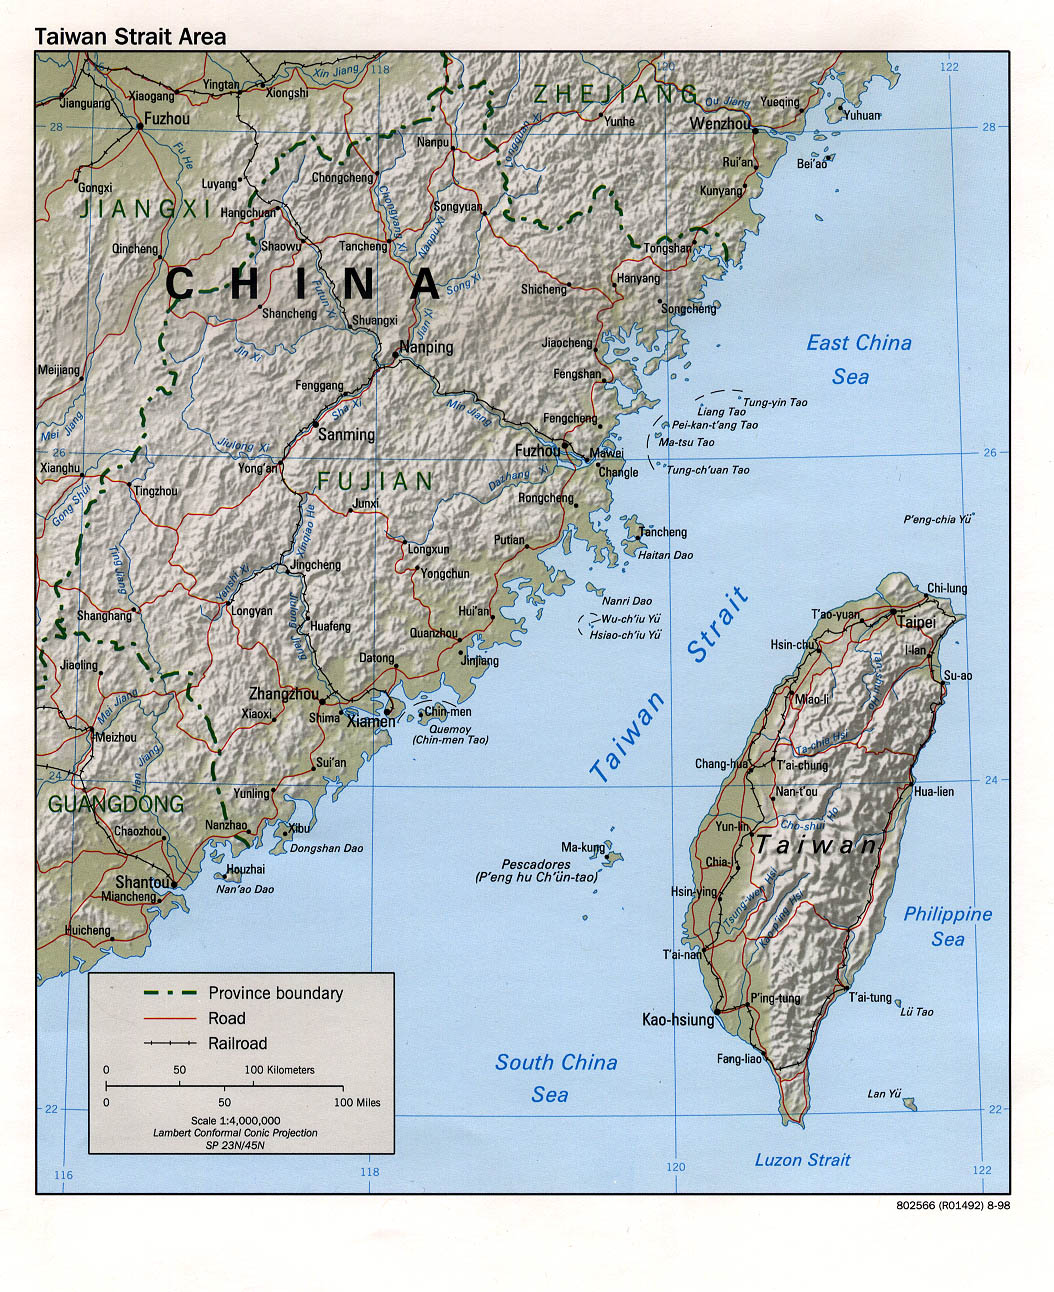 Taiwan Maps - Perry-Castañeda Map Collection - UT Library Online